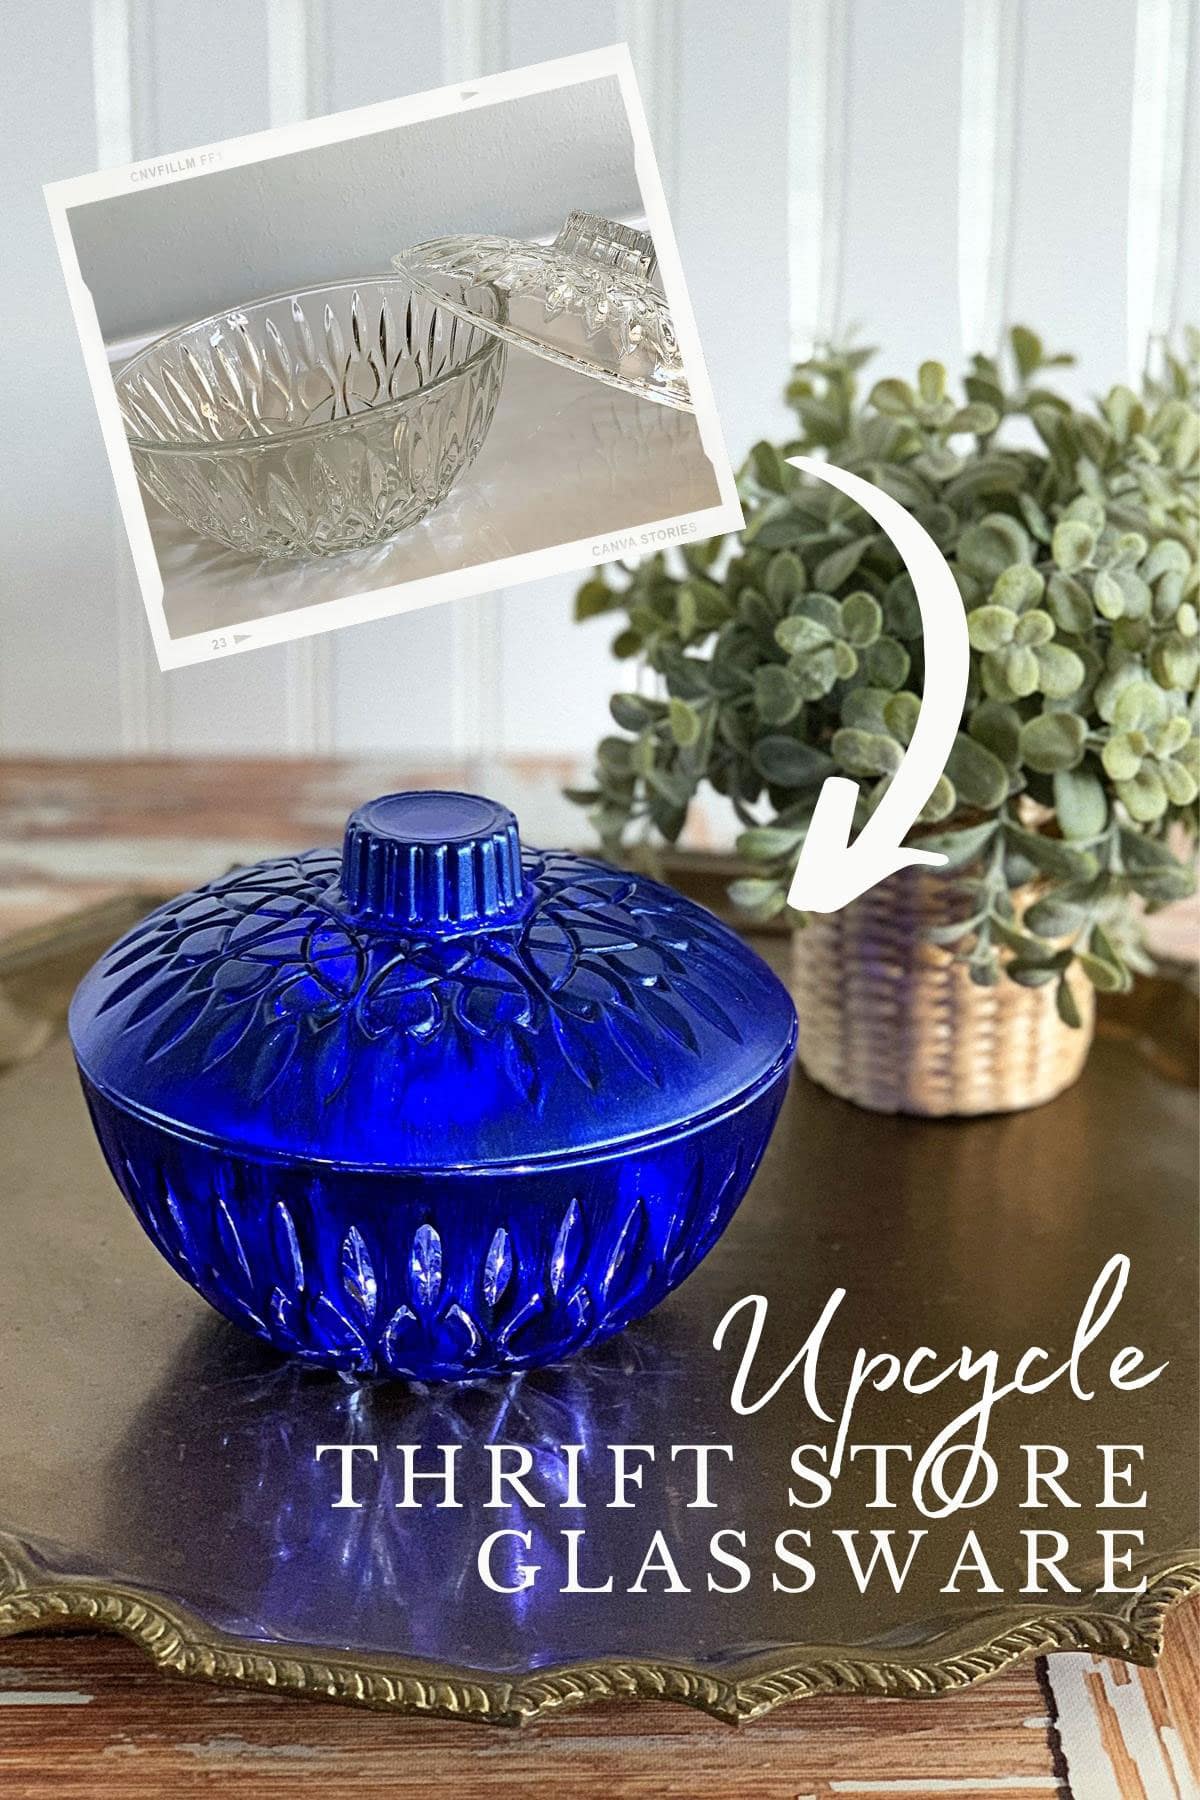 How to upcycle thrift store glass to make unique and stylish home decor.